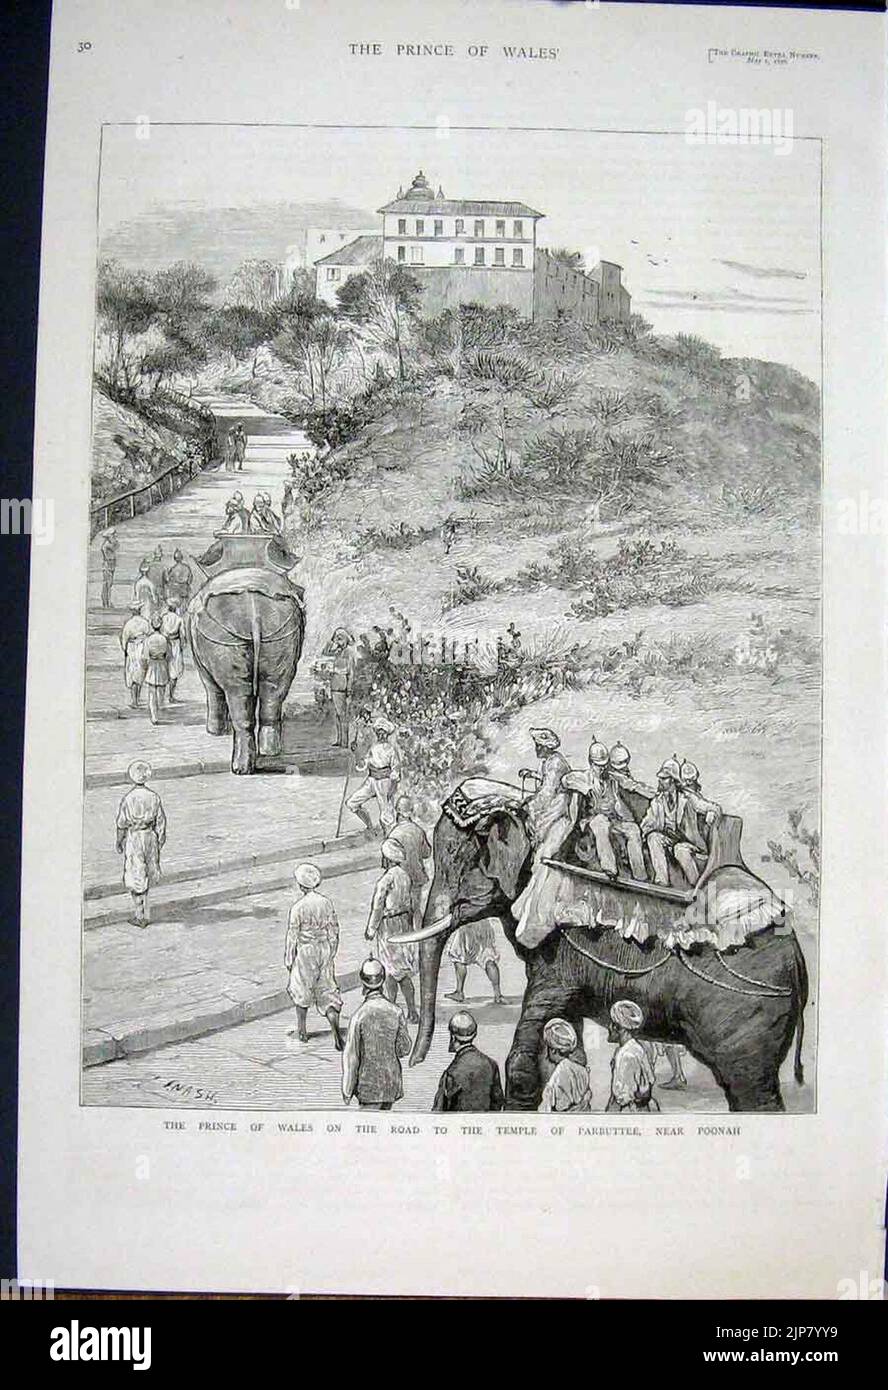 The Royal Visit to India, the Prince of Wales on the Road to the Temple of Parbuttee, near Poonah - The Graphic 1875 Stock Photo